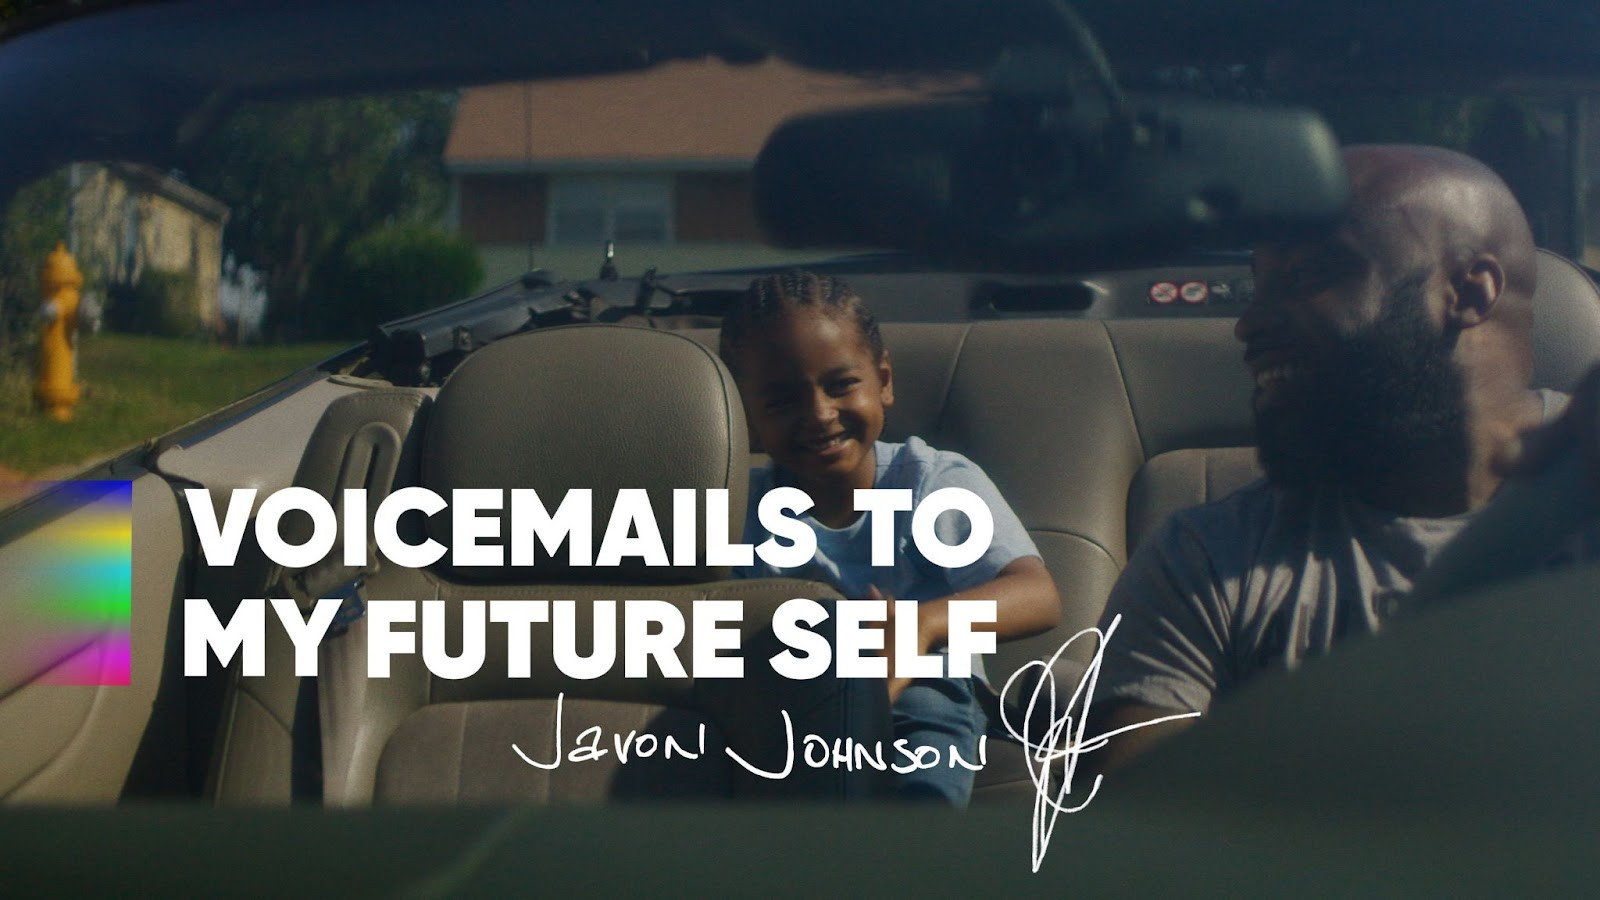 Key Art for Voicemails to My Future Self with Javon Johnson.